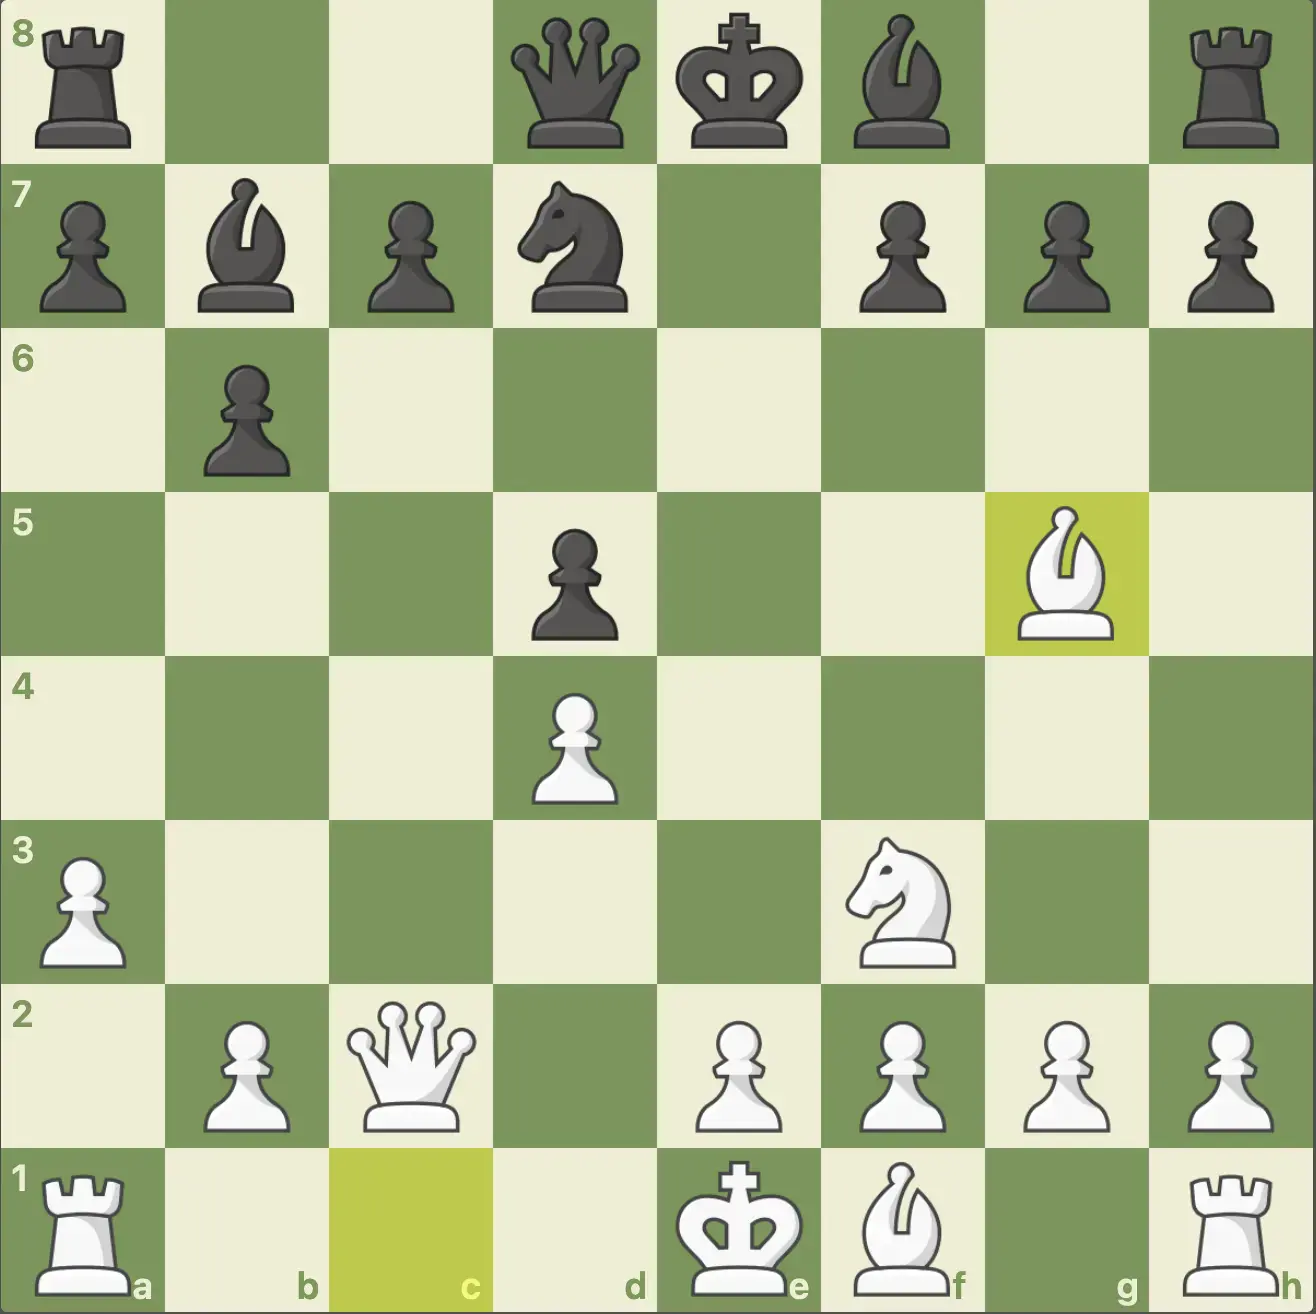 A position in a game of chess